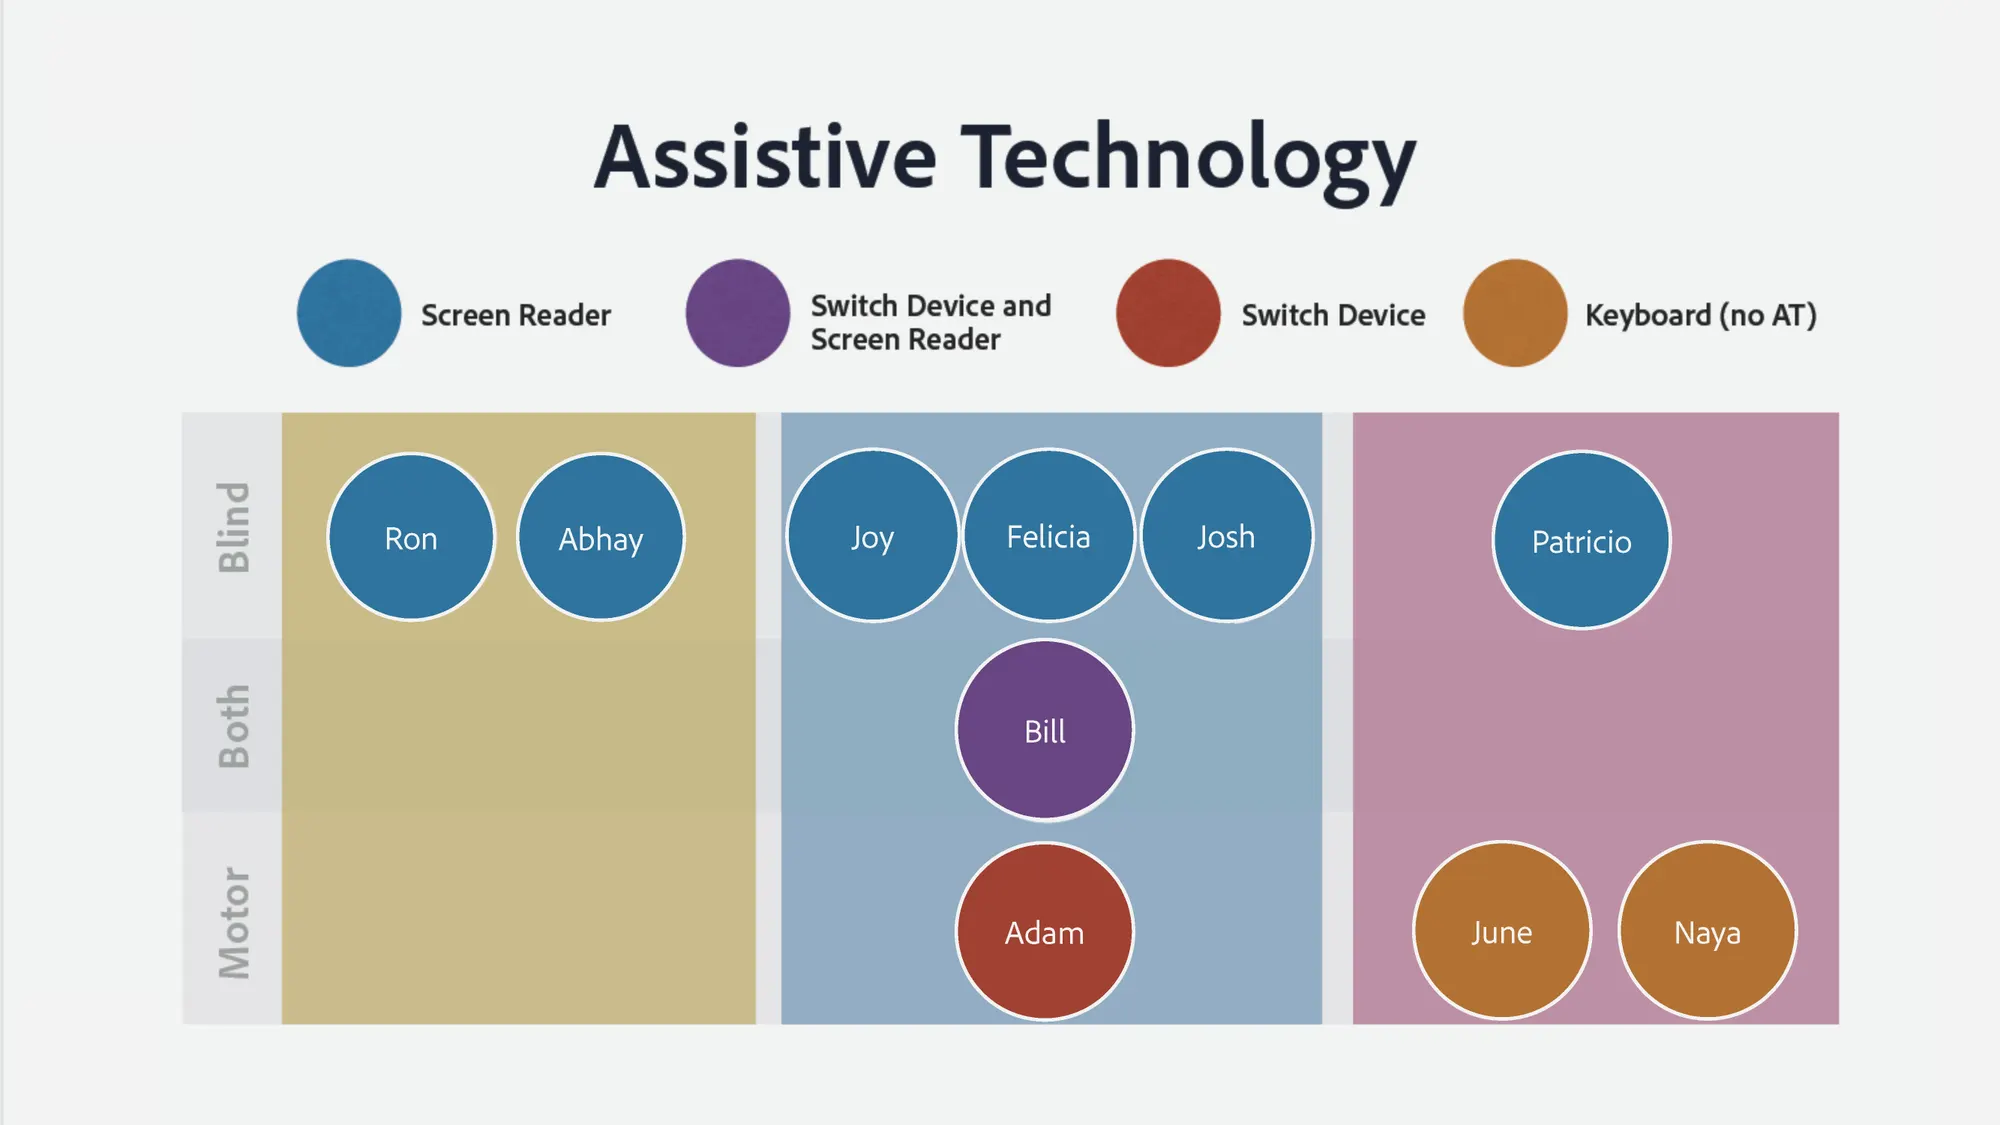 Chart titled Assistive Technology with ten names (each identified as using a screen reader, switch device & screen reader, switch device, or keyboard/none) divided among three rows (top to bottom): Blind, Both, Motor.